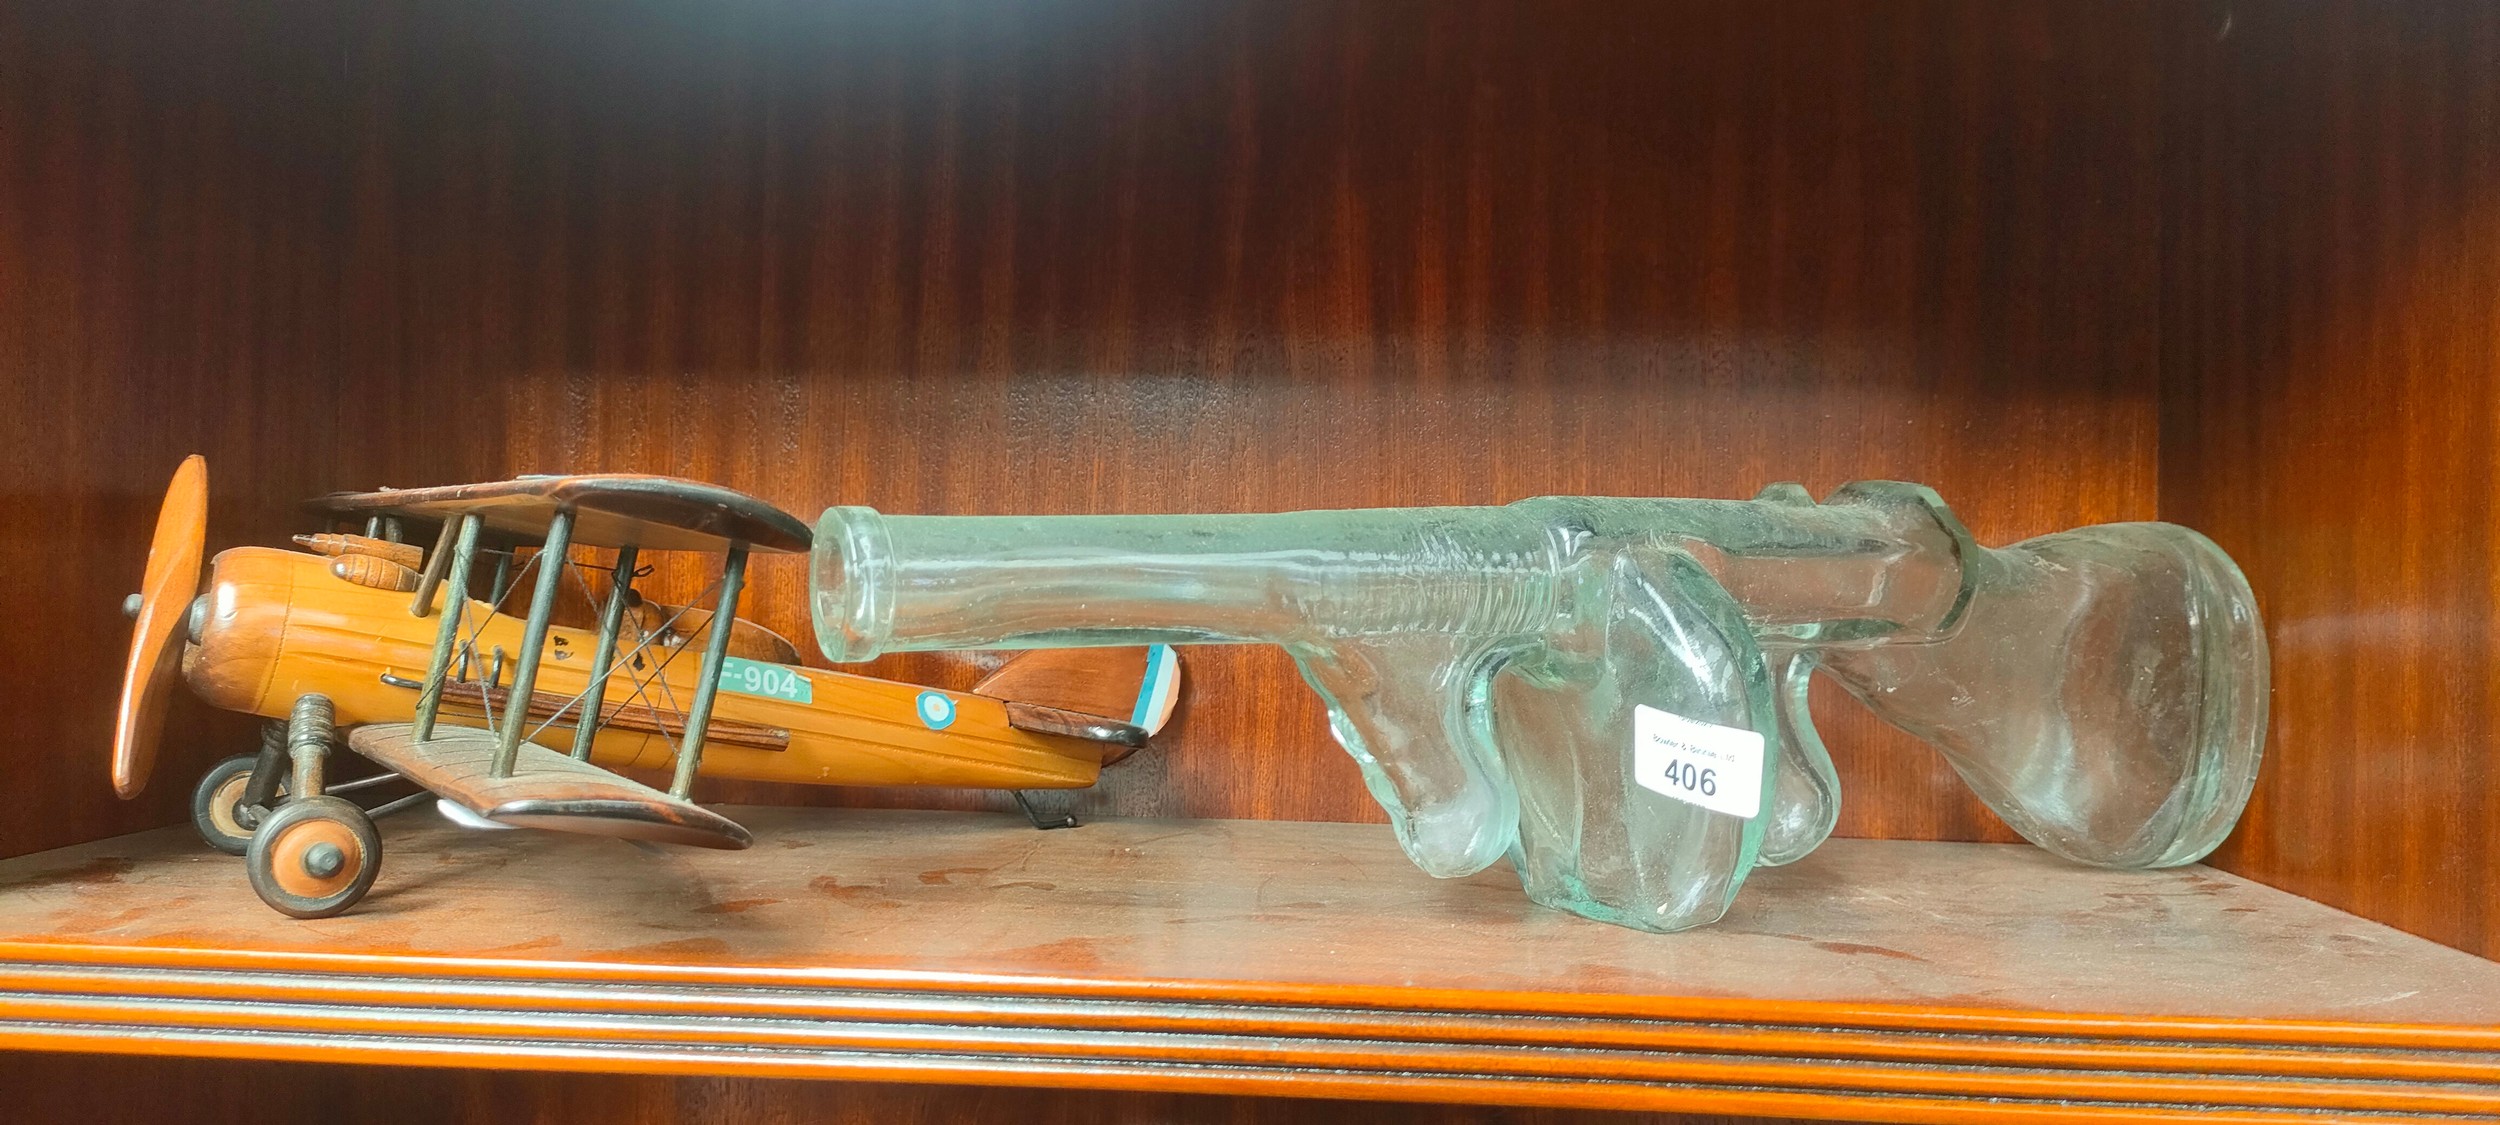 Vintage pressed glass tommy gun decanter and wooden plane model